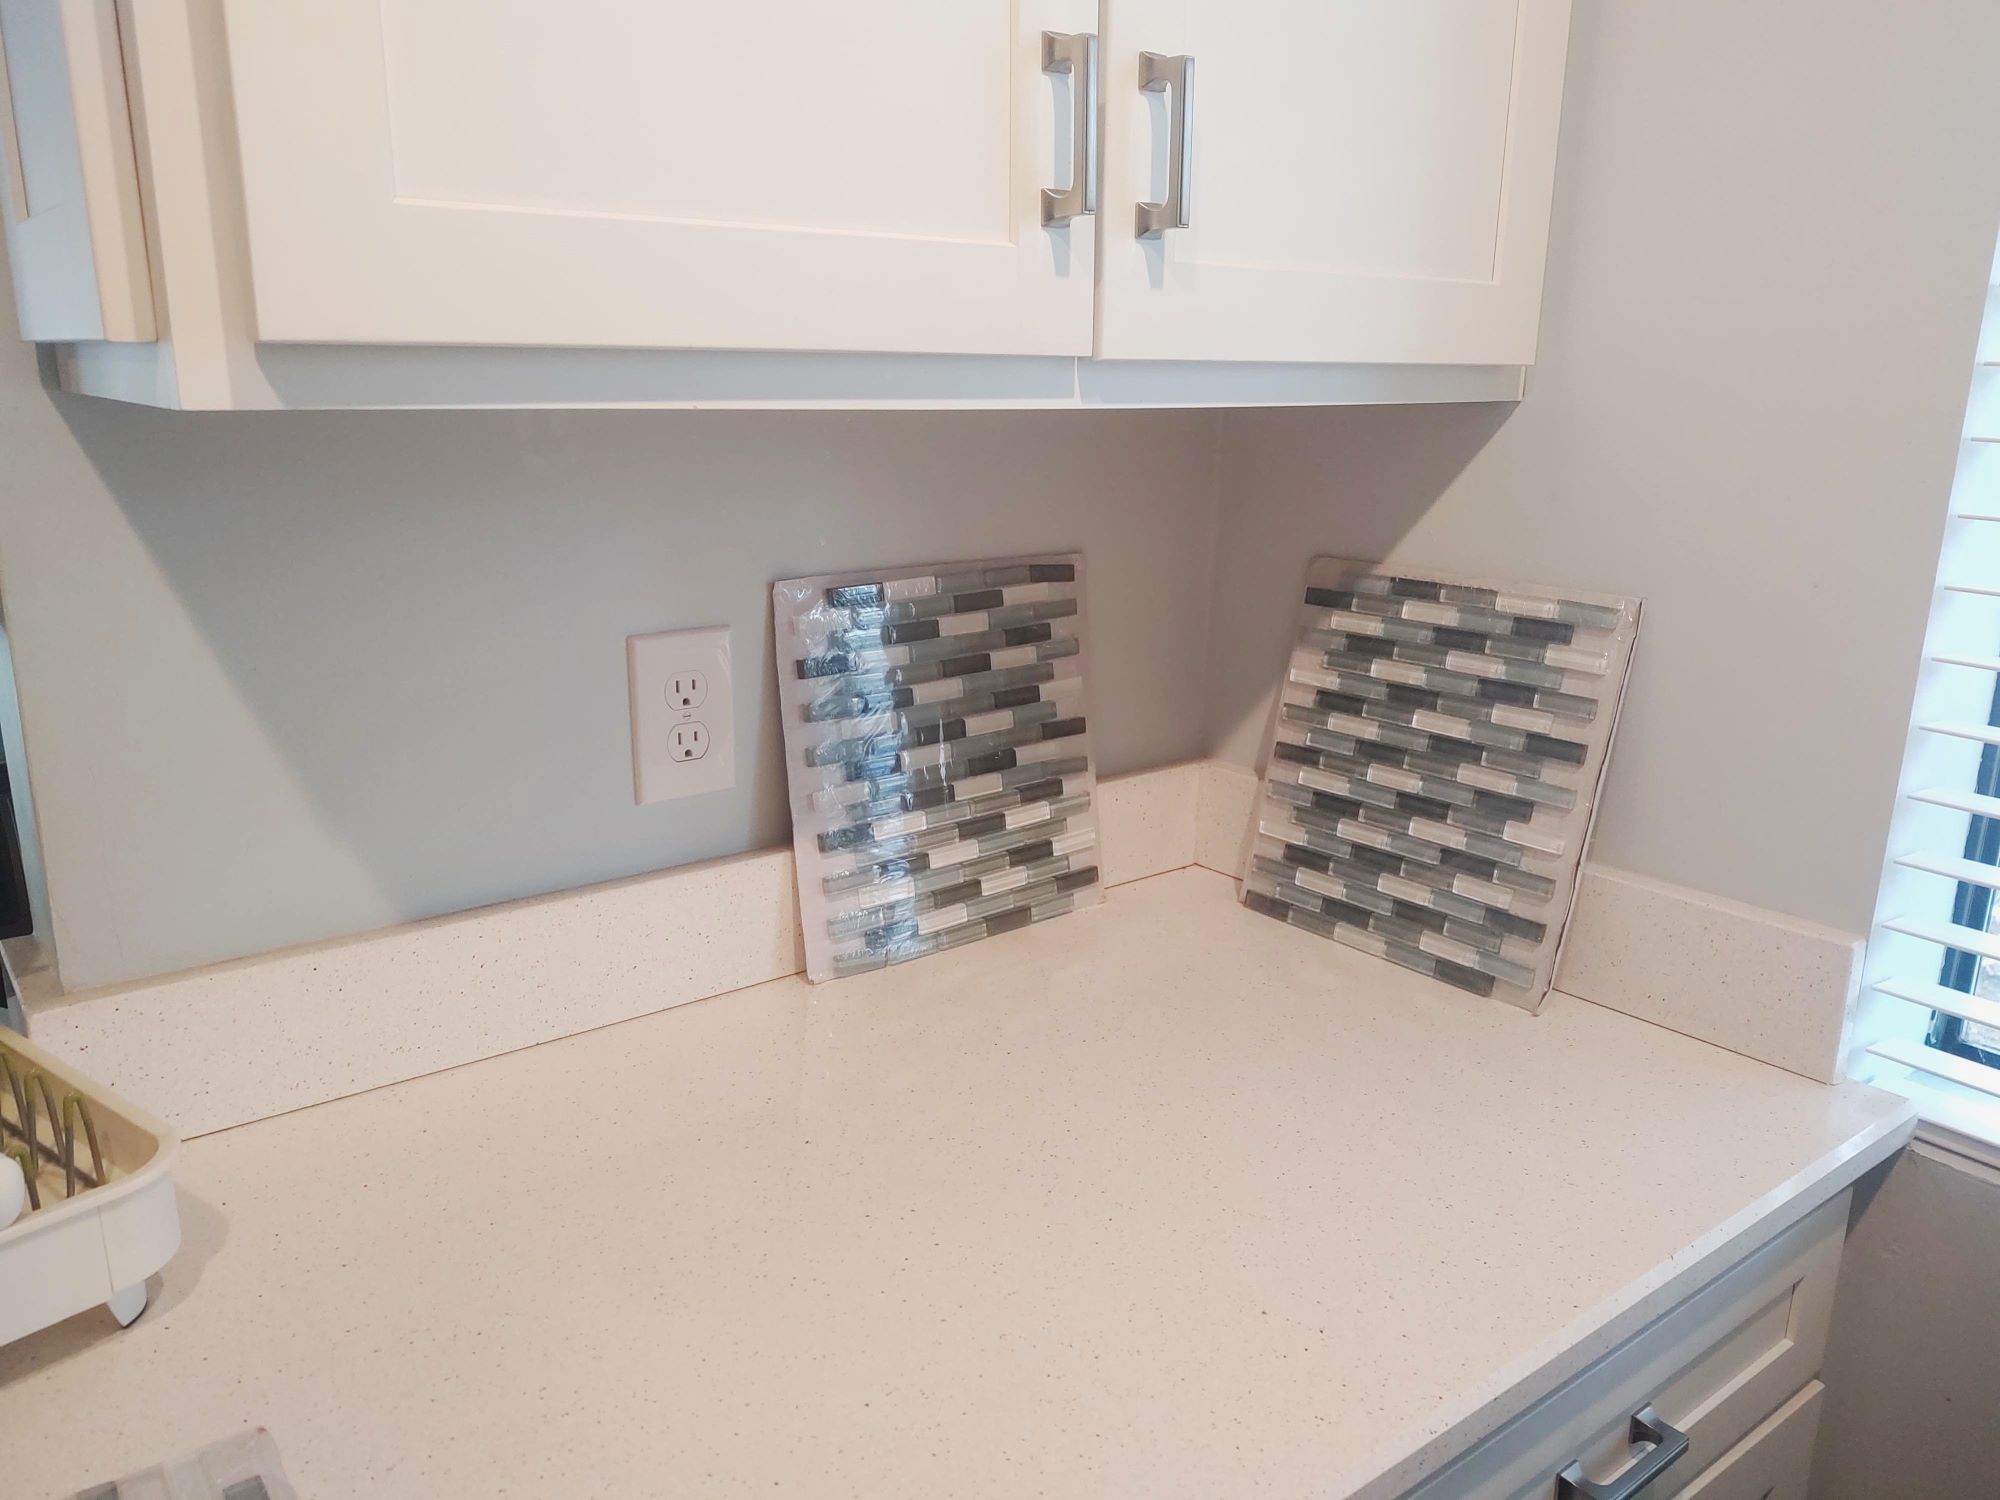 How To Attach Backsplash To Wall